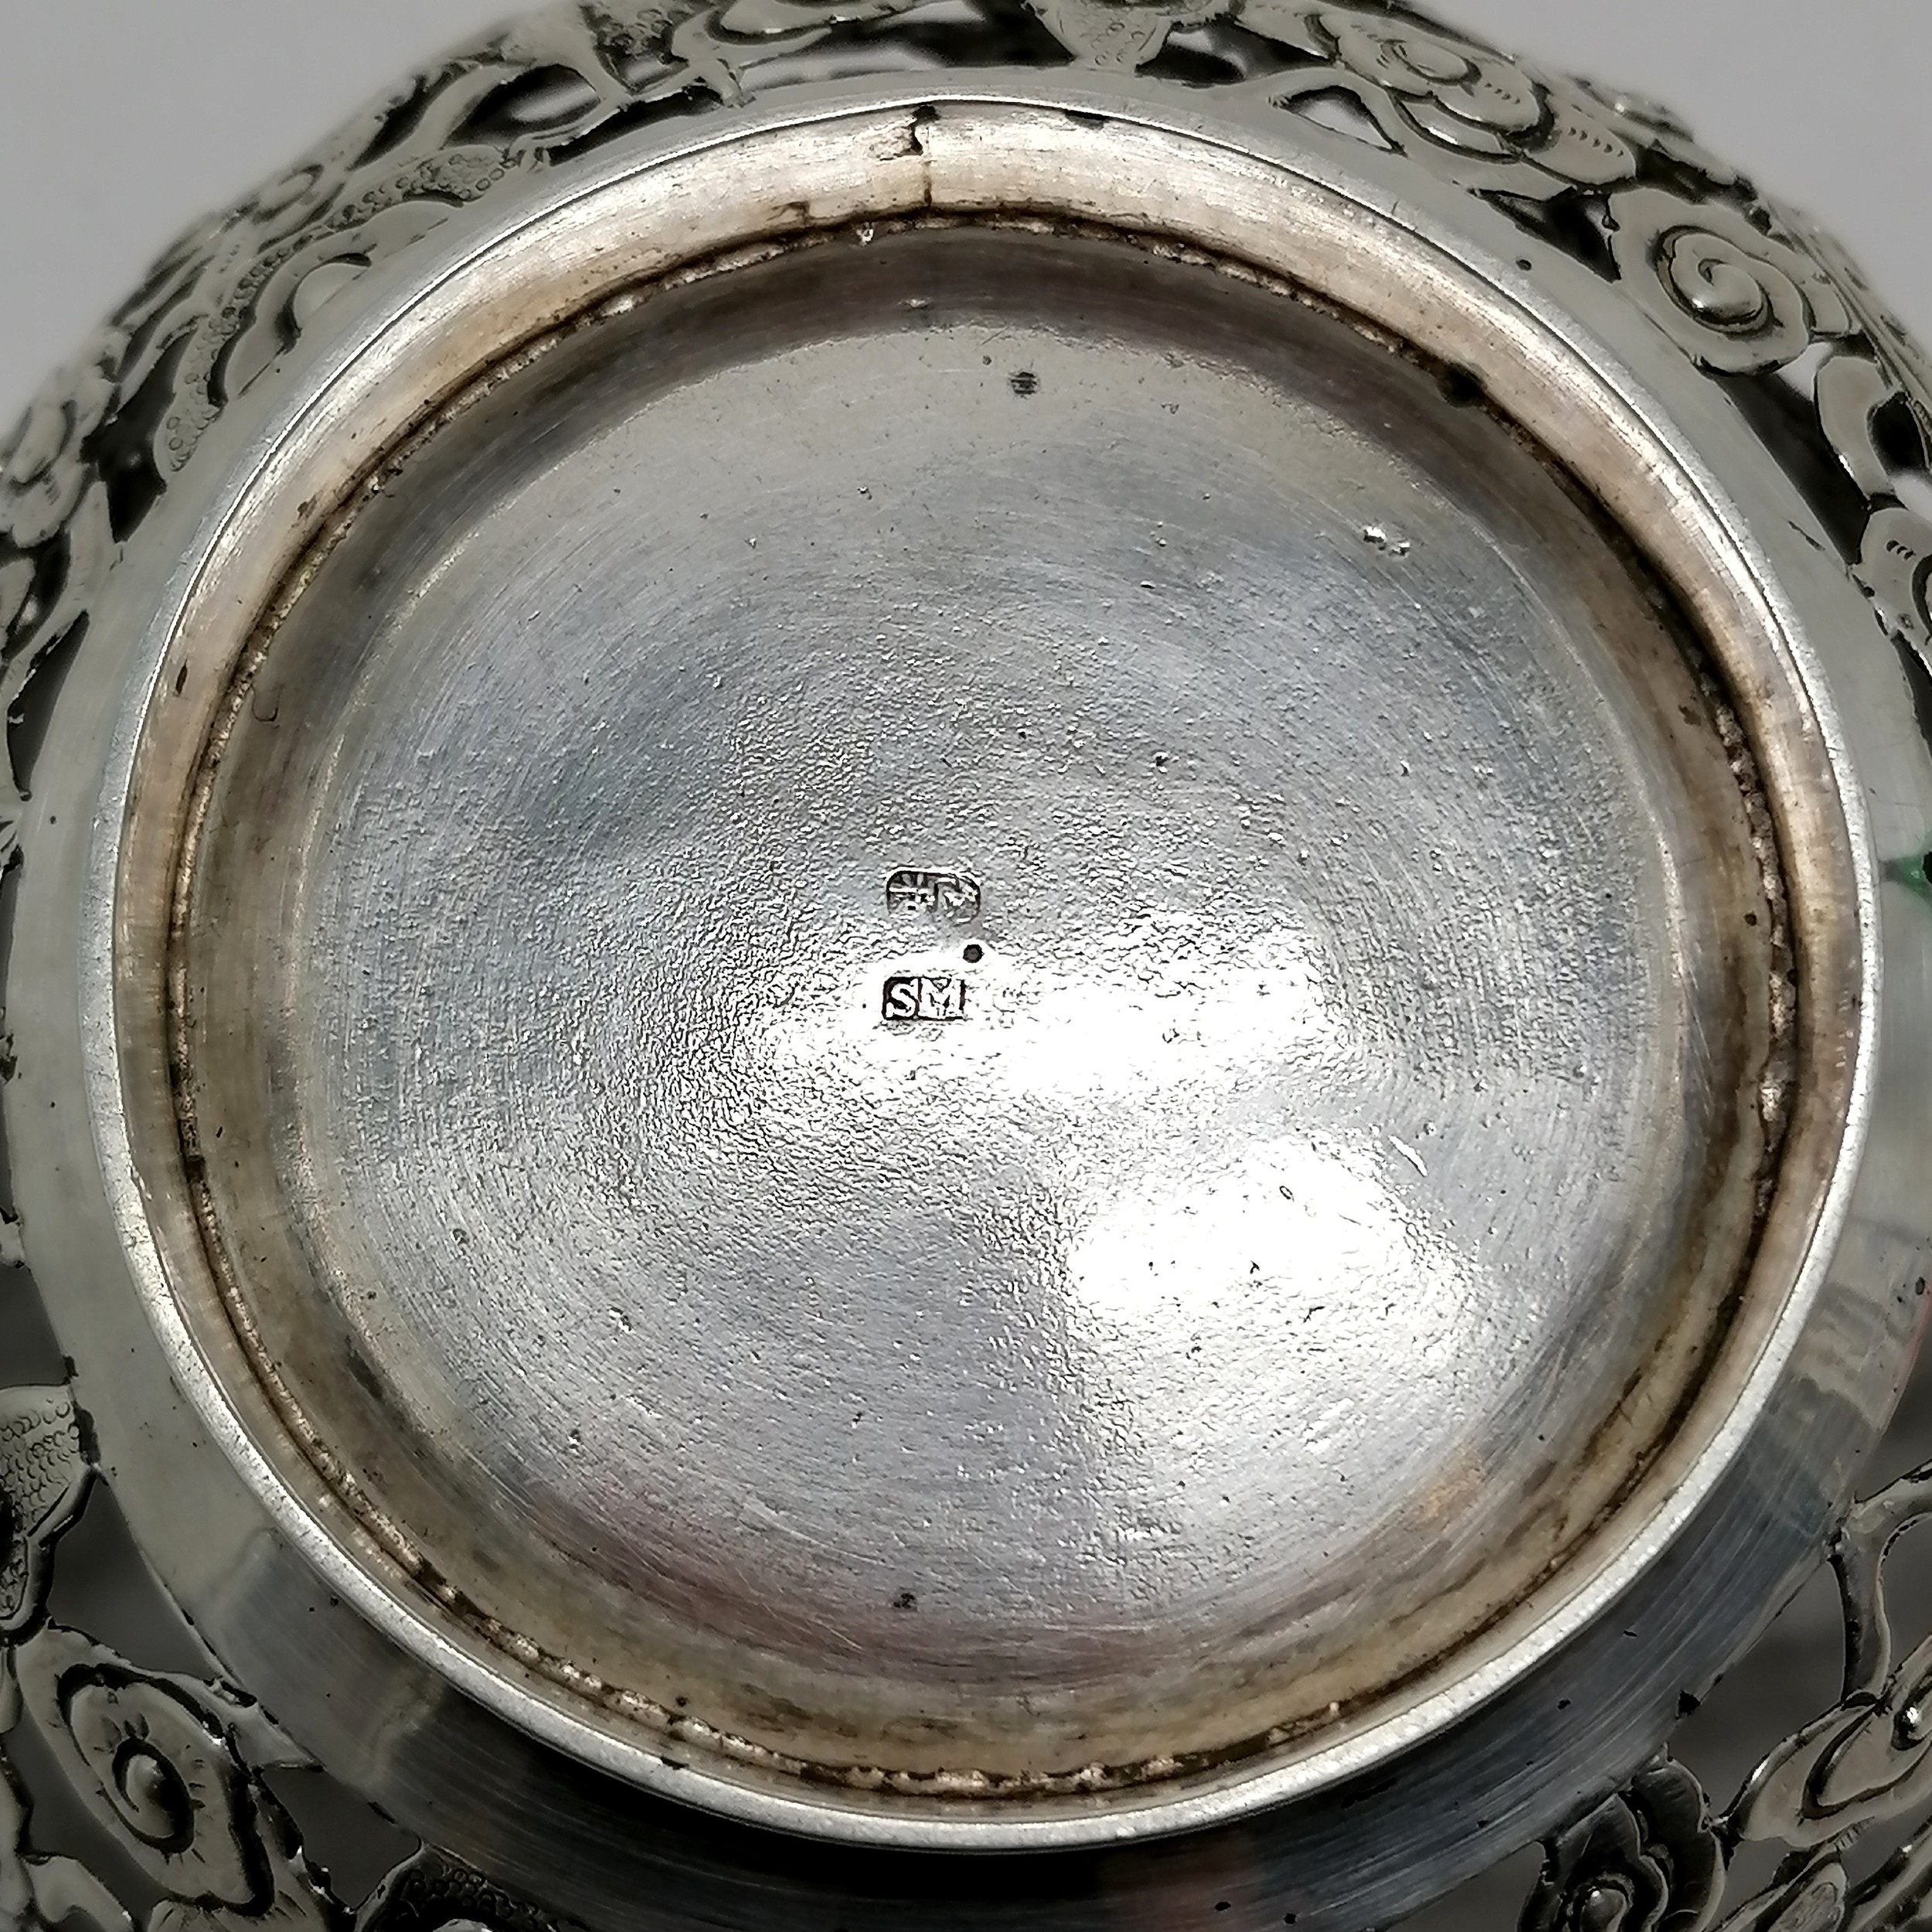 Chinese antique silver bowl with pierced decoration depicting 2 dragons & flaming pearl cartouche by - Image 3 of 6